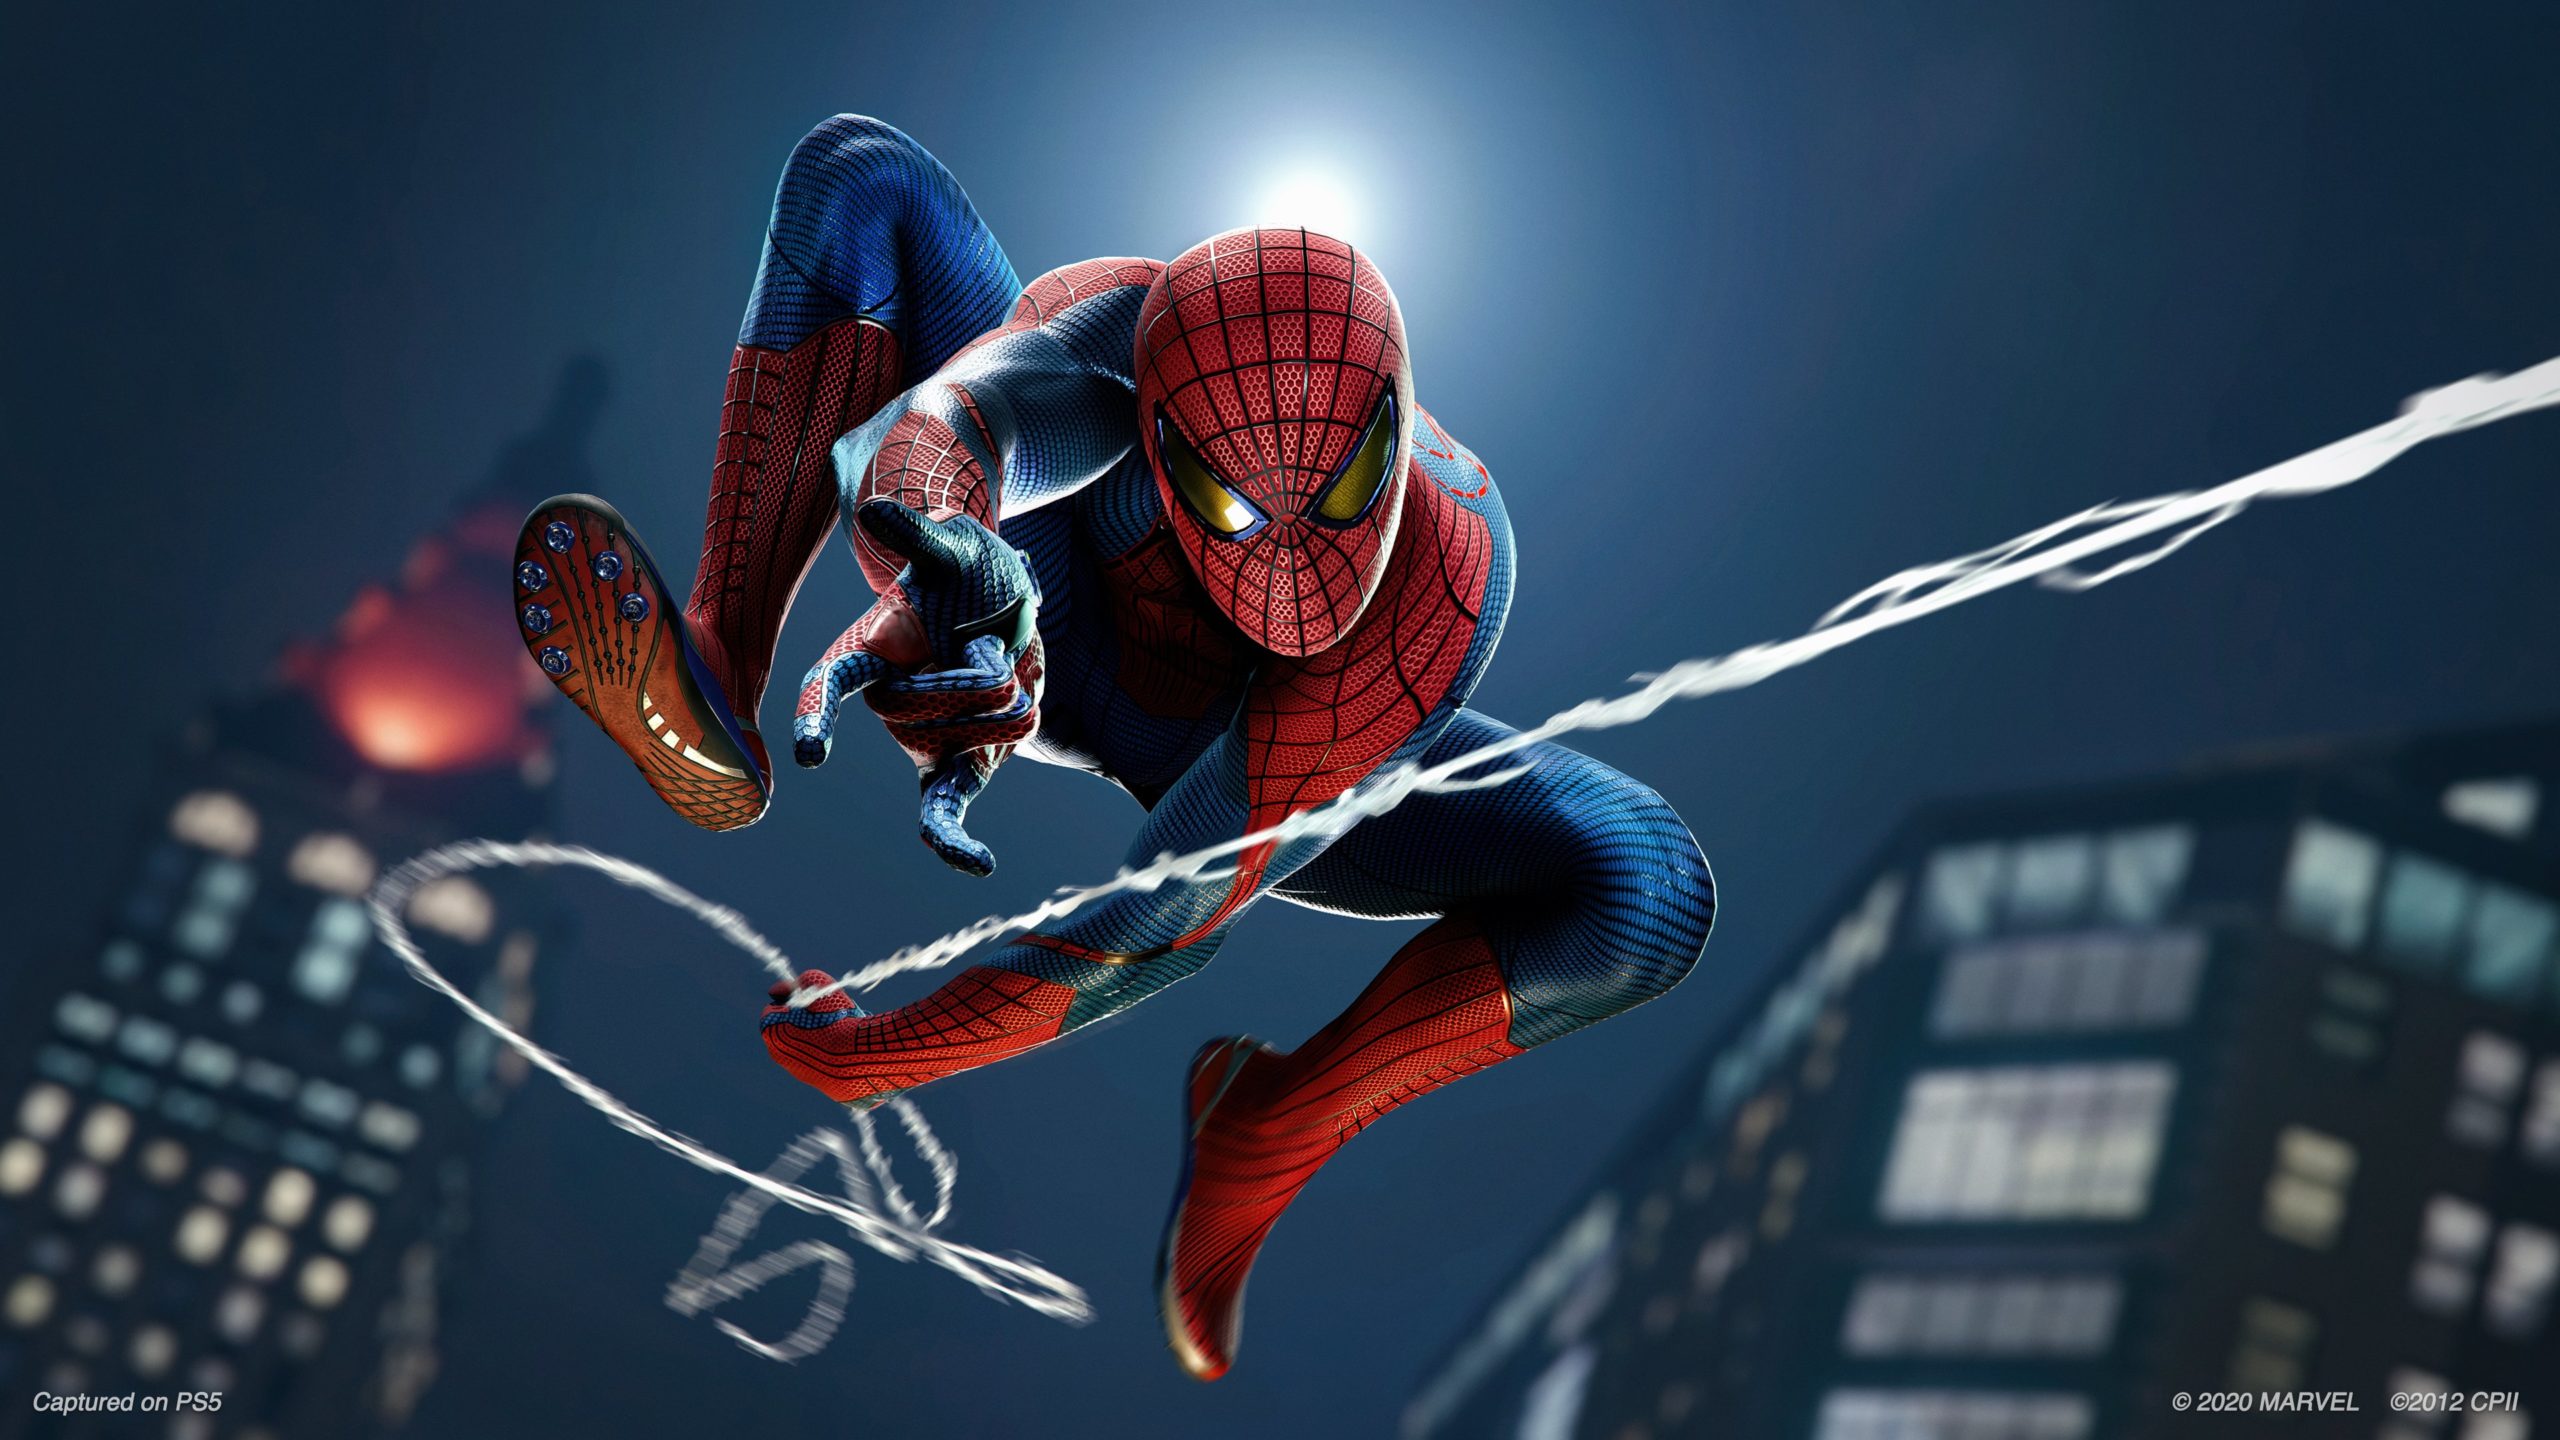 Marvel's Spider-Man 2 platforms: Is it coming to PS4, PC, or Xbox